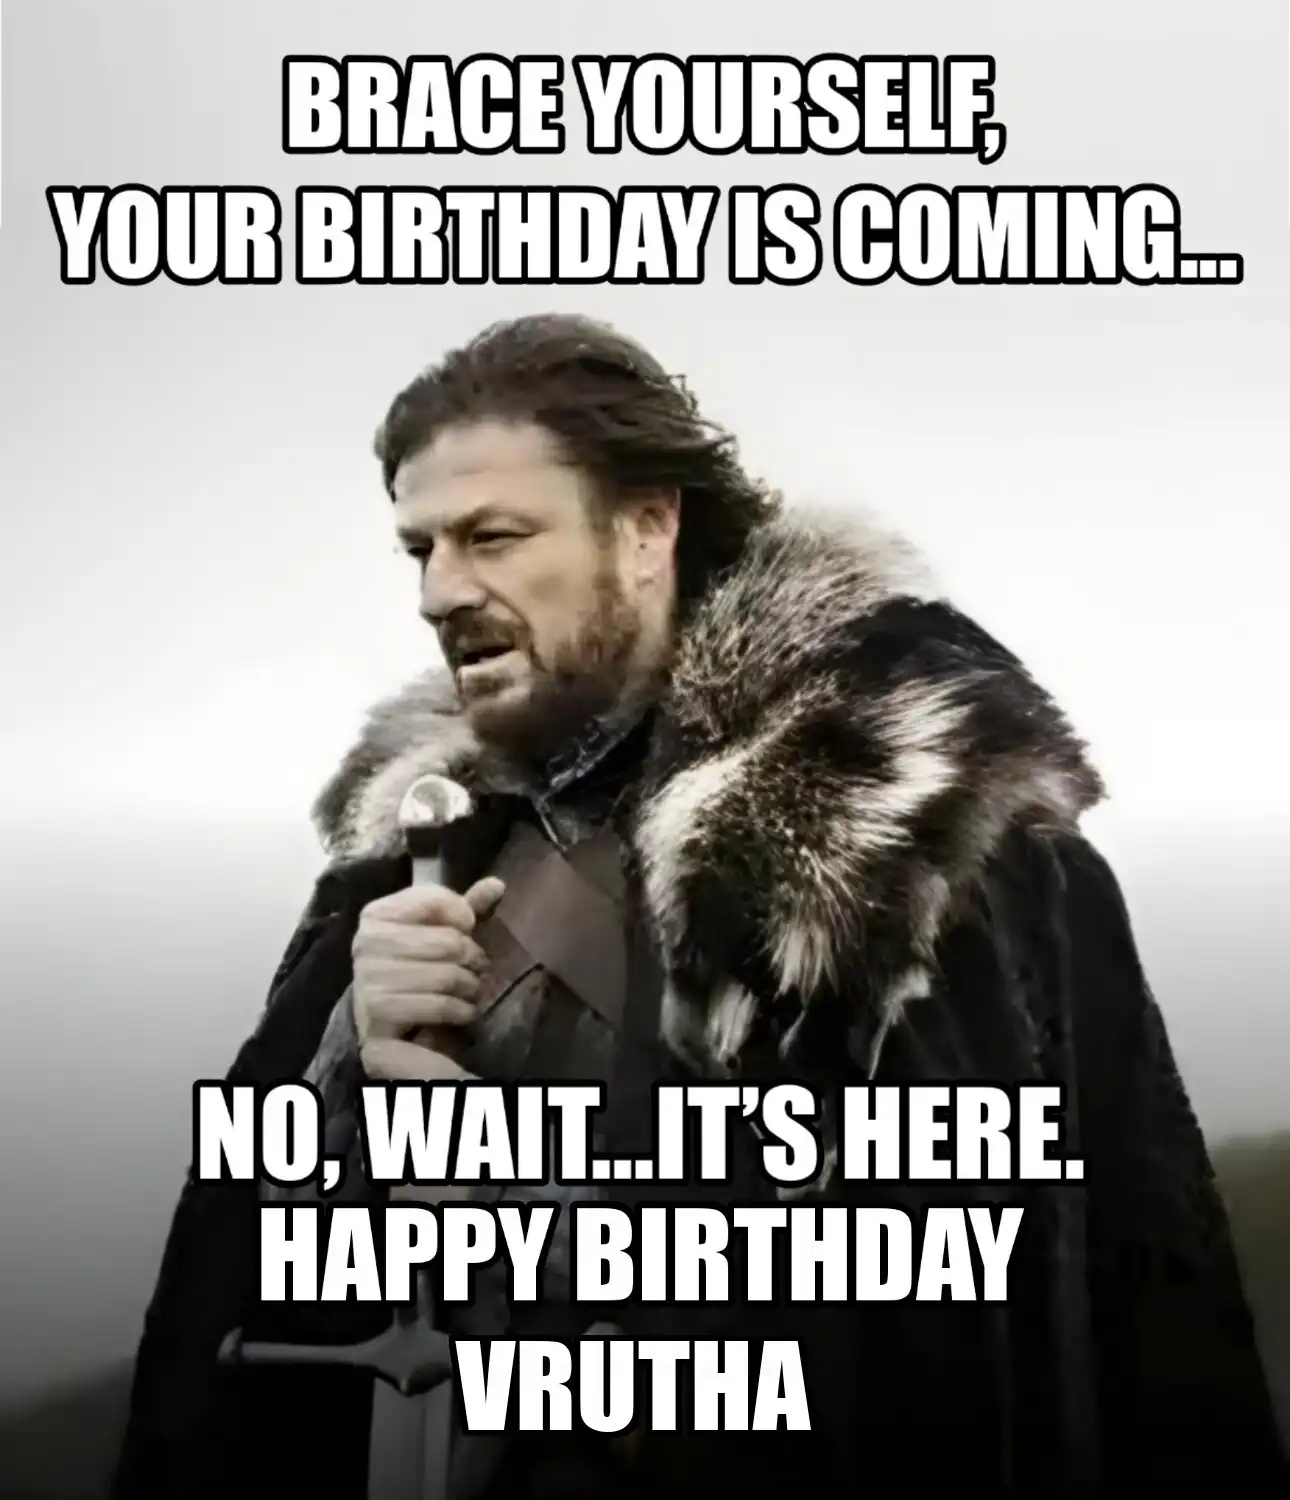 Happy Birthday Vrutha Brace Yourself Your Birthday Is Coming Meme